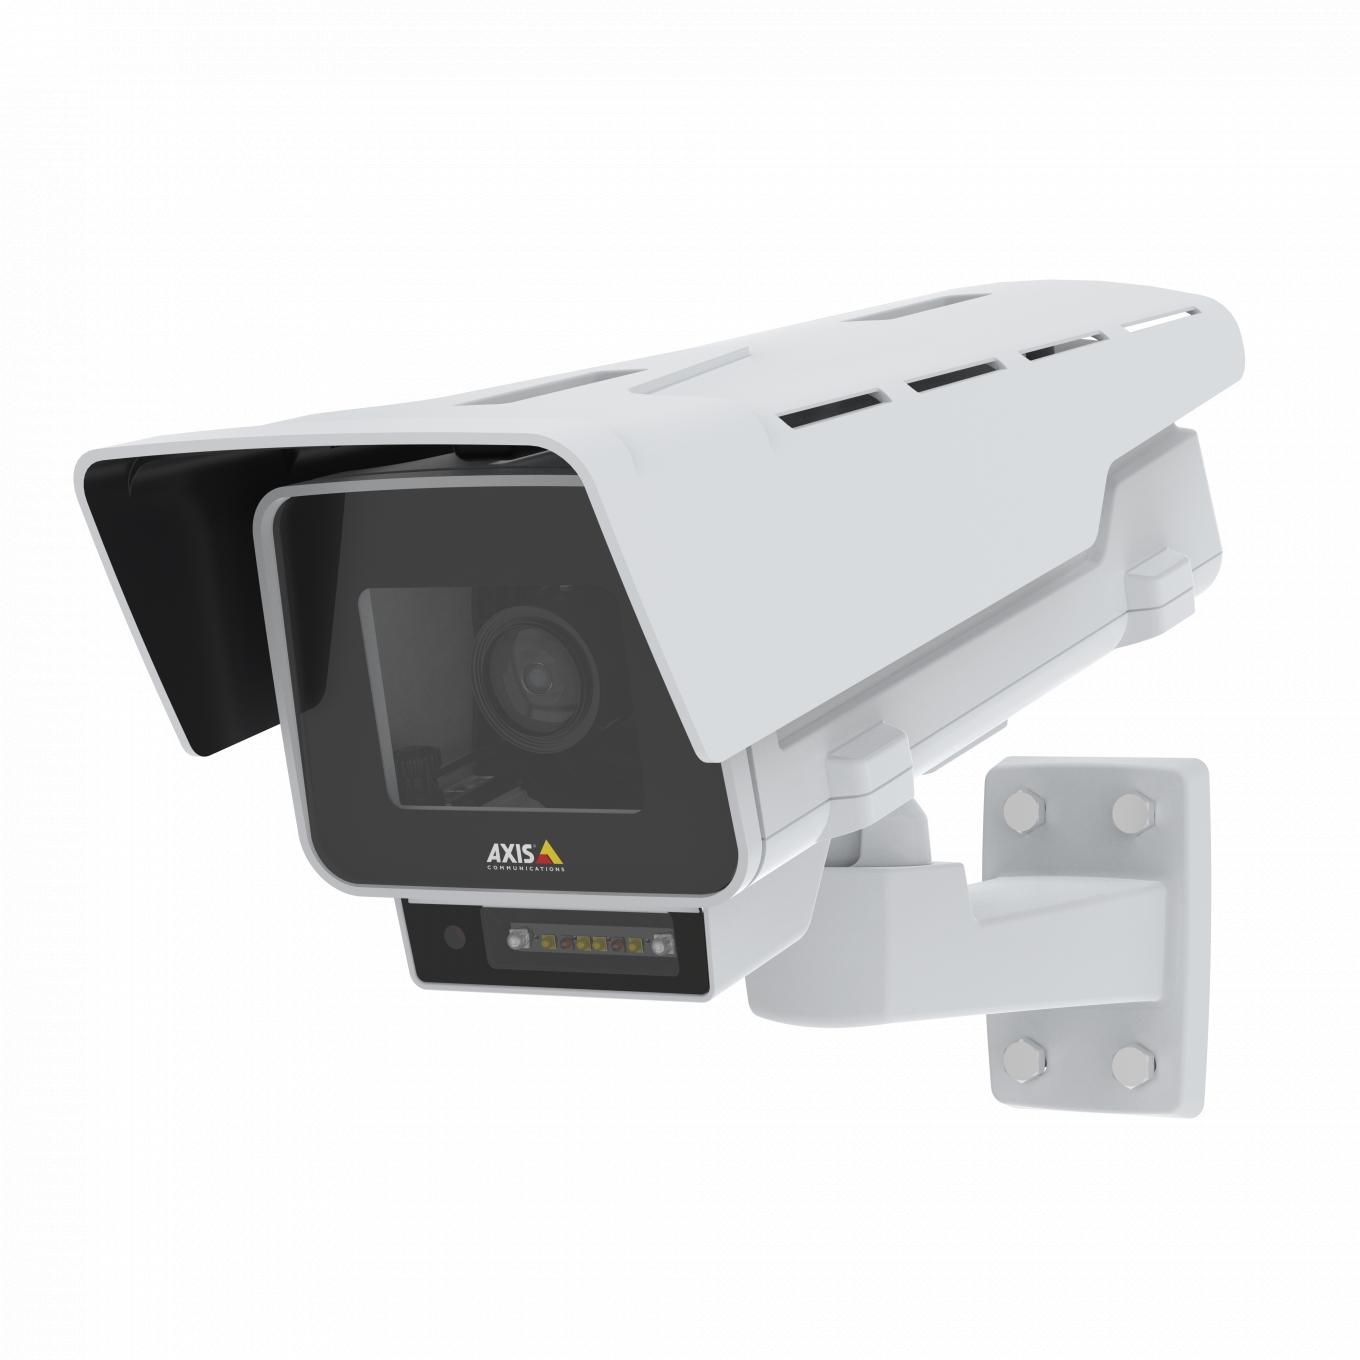 AXIS TQ1902-E IR Illuminator KiT attachded to camera AXIS P1375-E. White cover with black details.